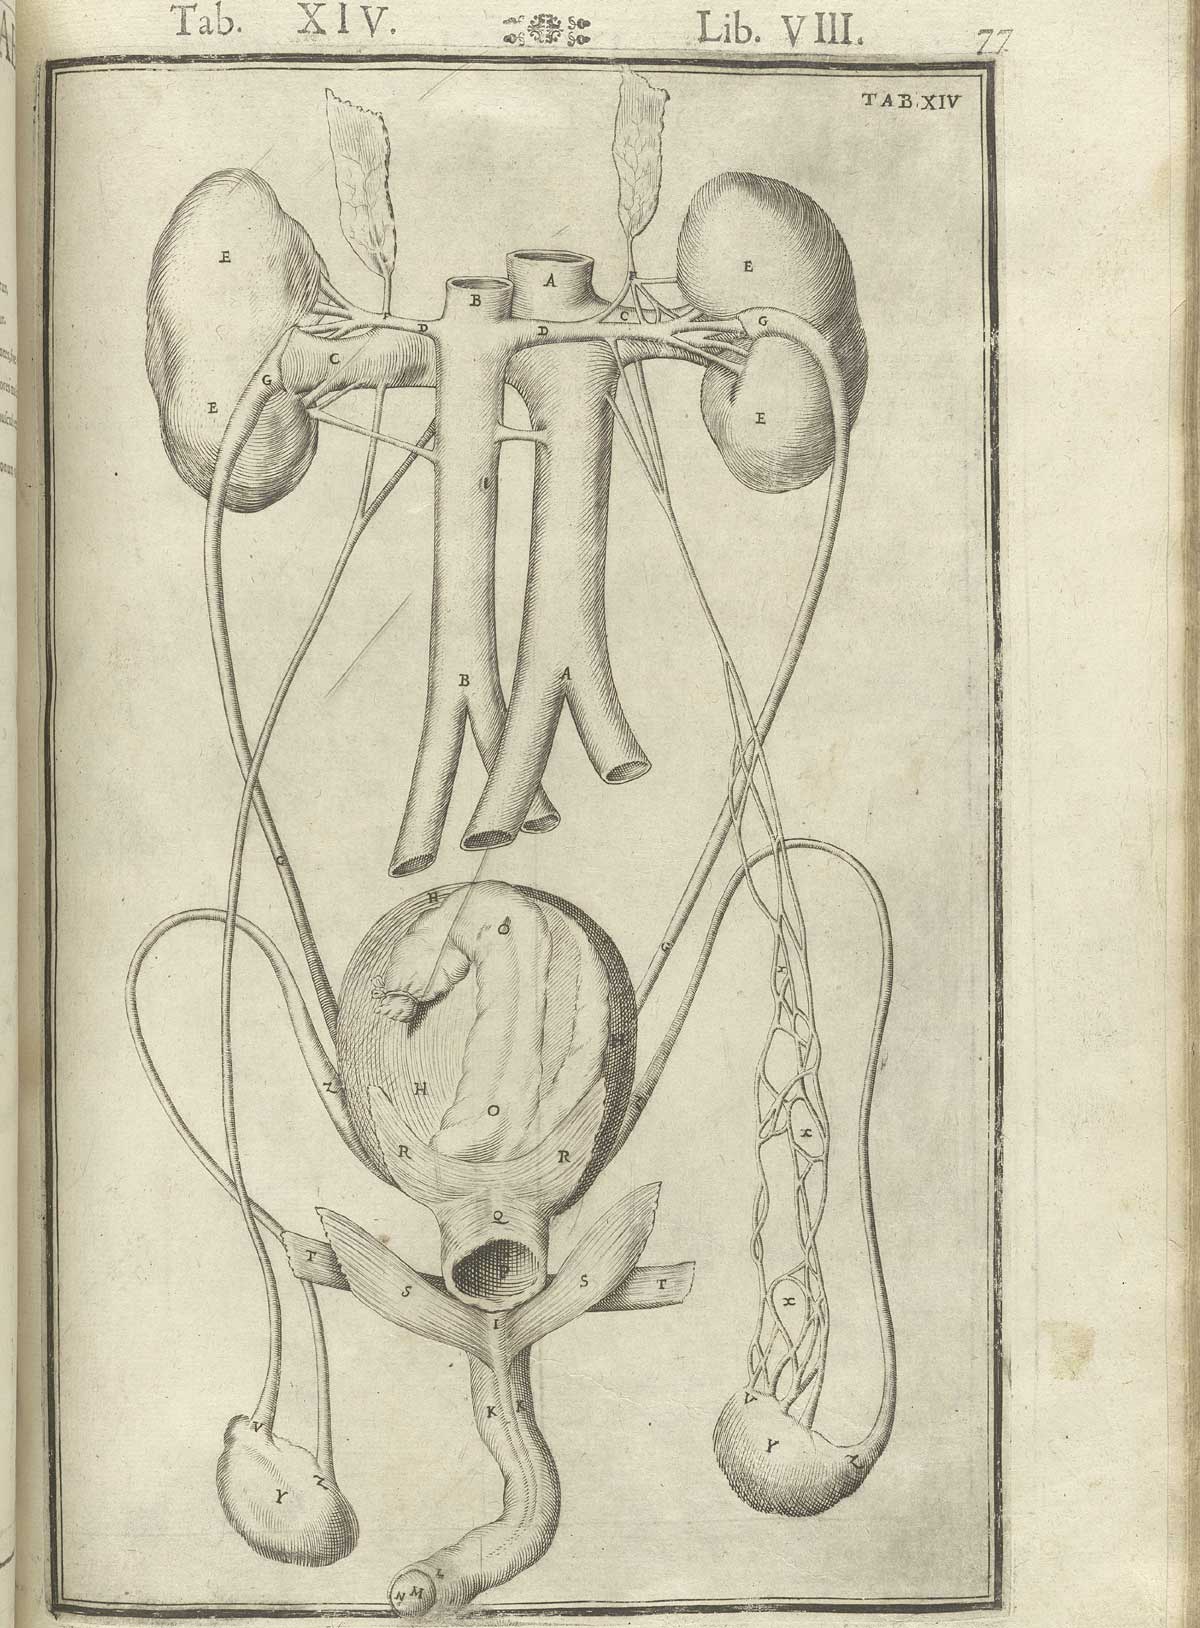 Engraving of the disembodied male renal and reproductive systems, with kidneys at top and ureters descending to bladder, urethra, and testicles, from Adriaan van de Spiegel and Giulio Cassieri’s De humani corporis fabrica libri decem, Venice, 1627, NLM call no. WZ 250 S755dh 1627.